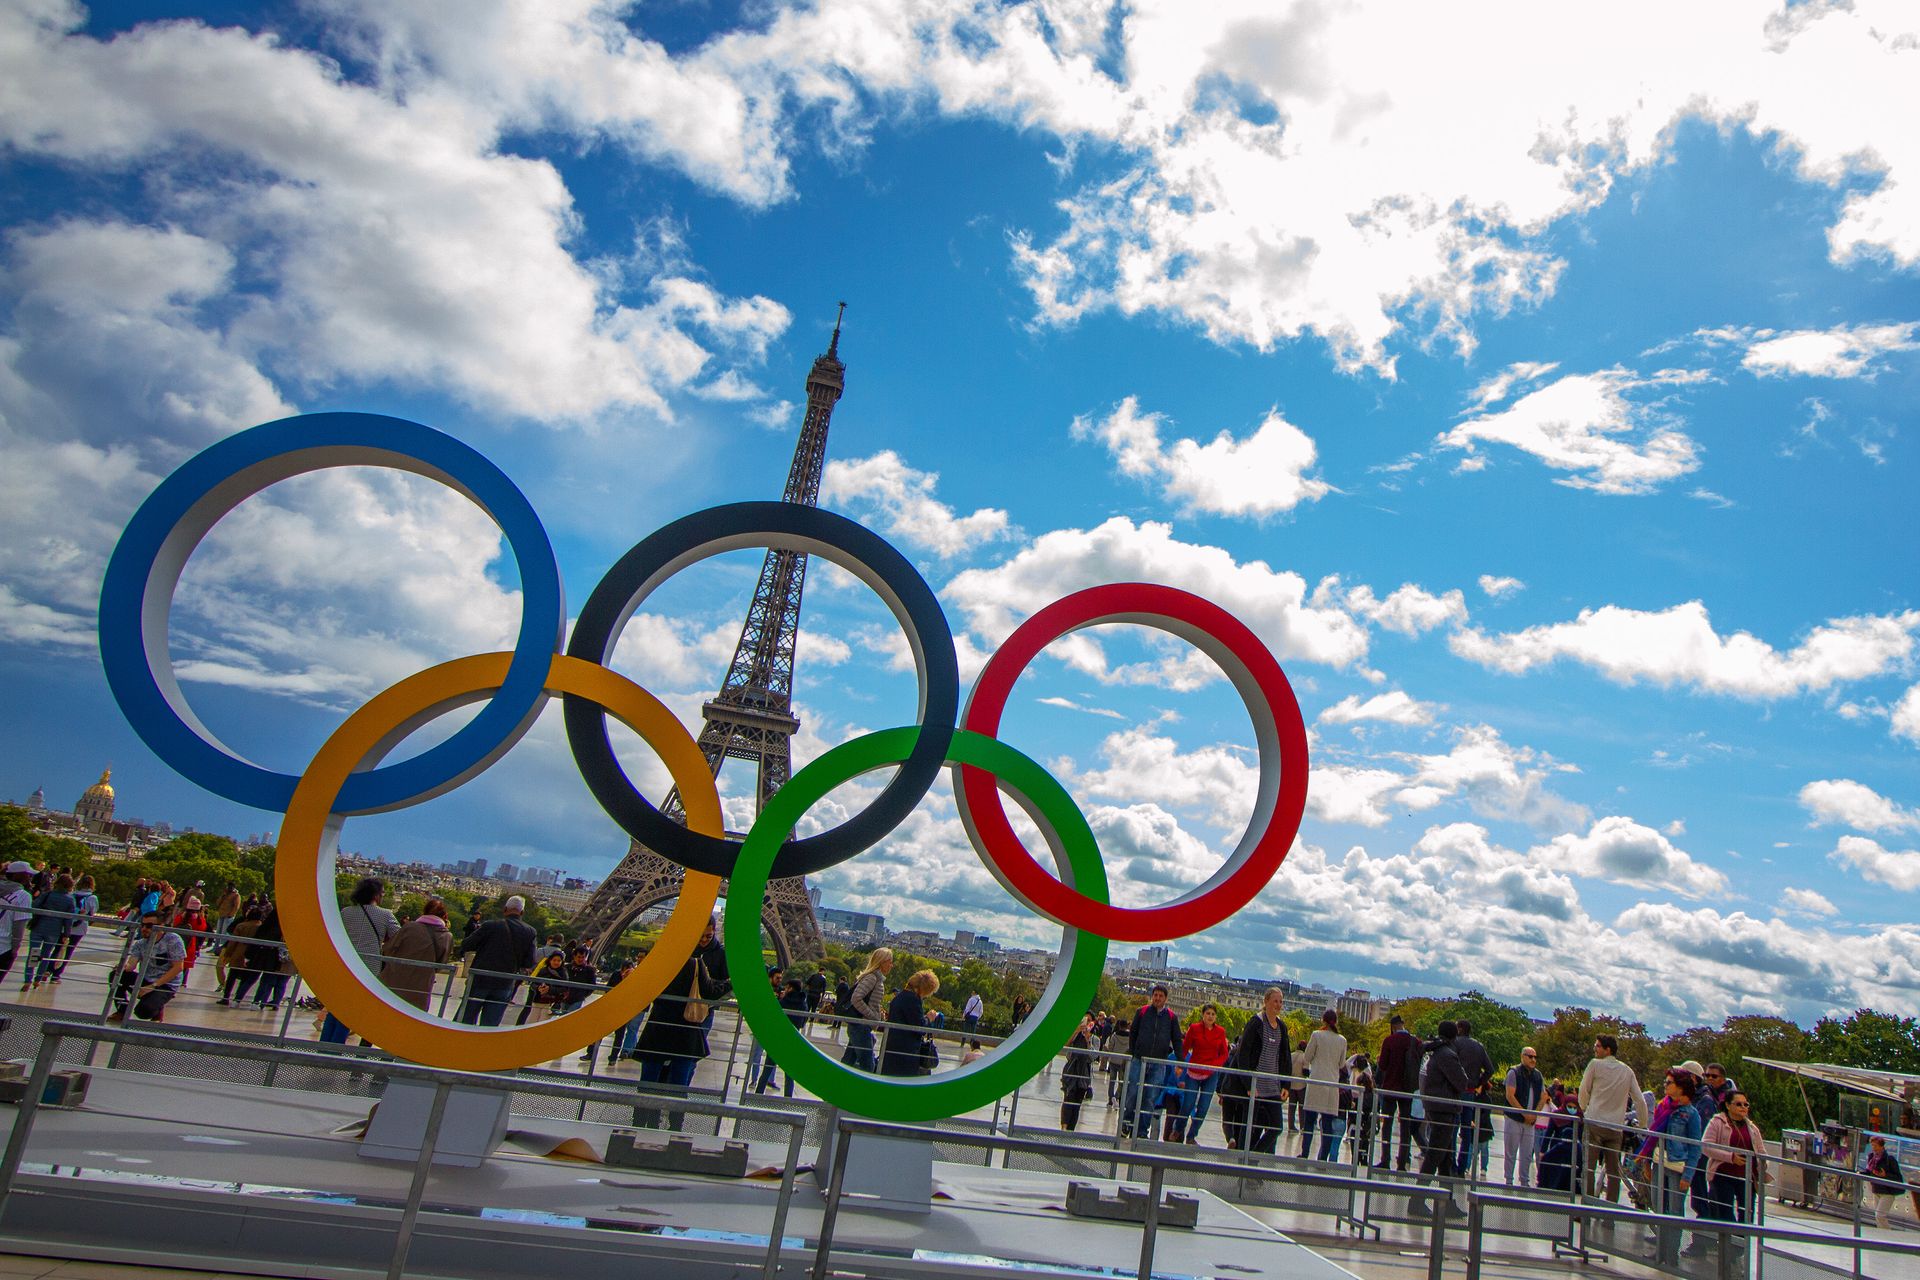 The critical problem for the IOC and the Olympic Games